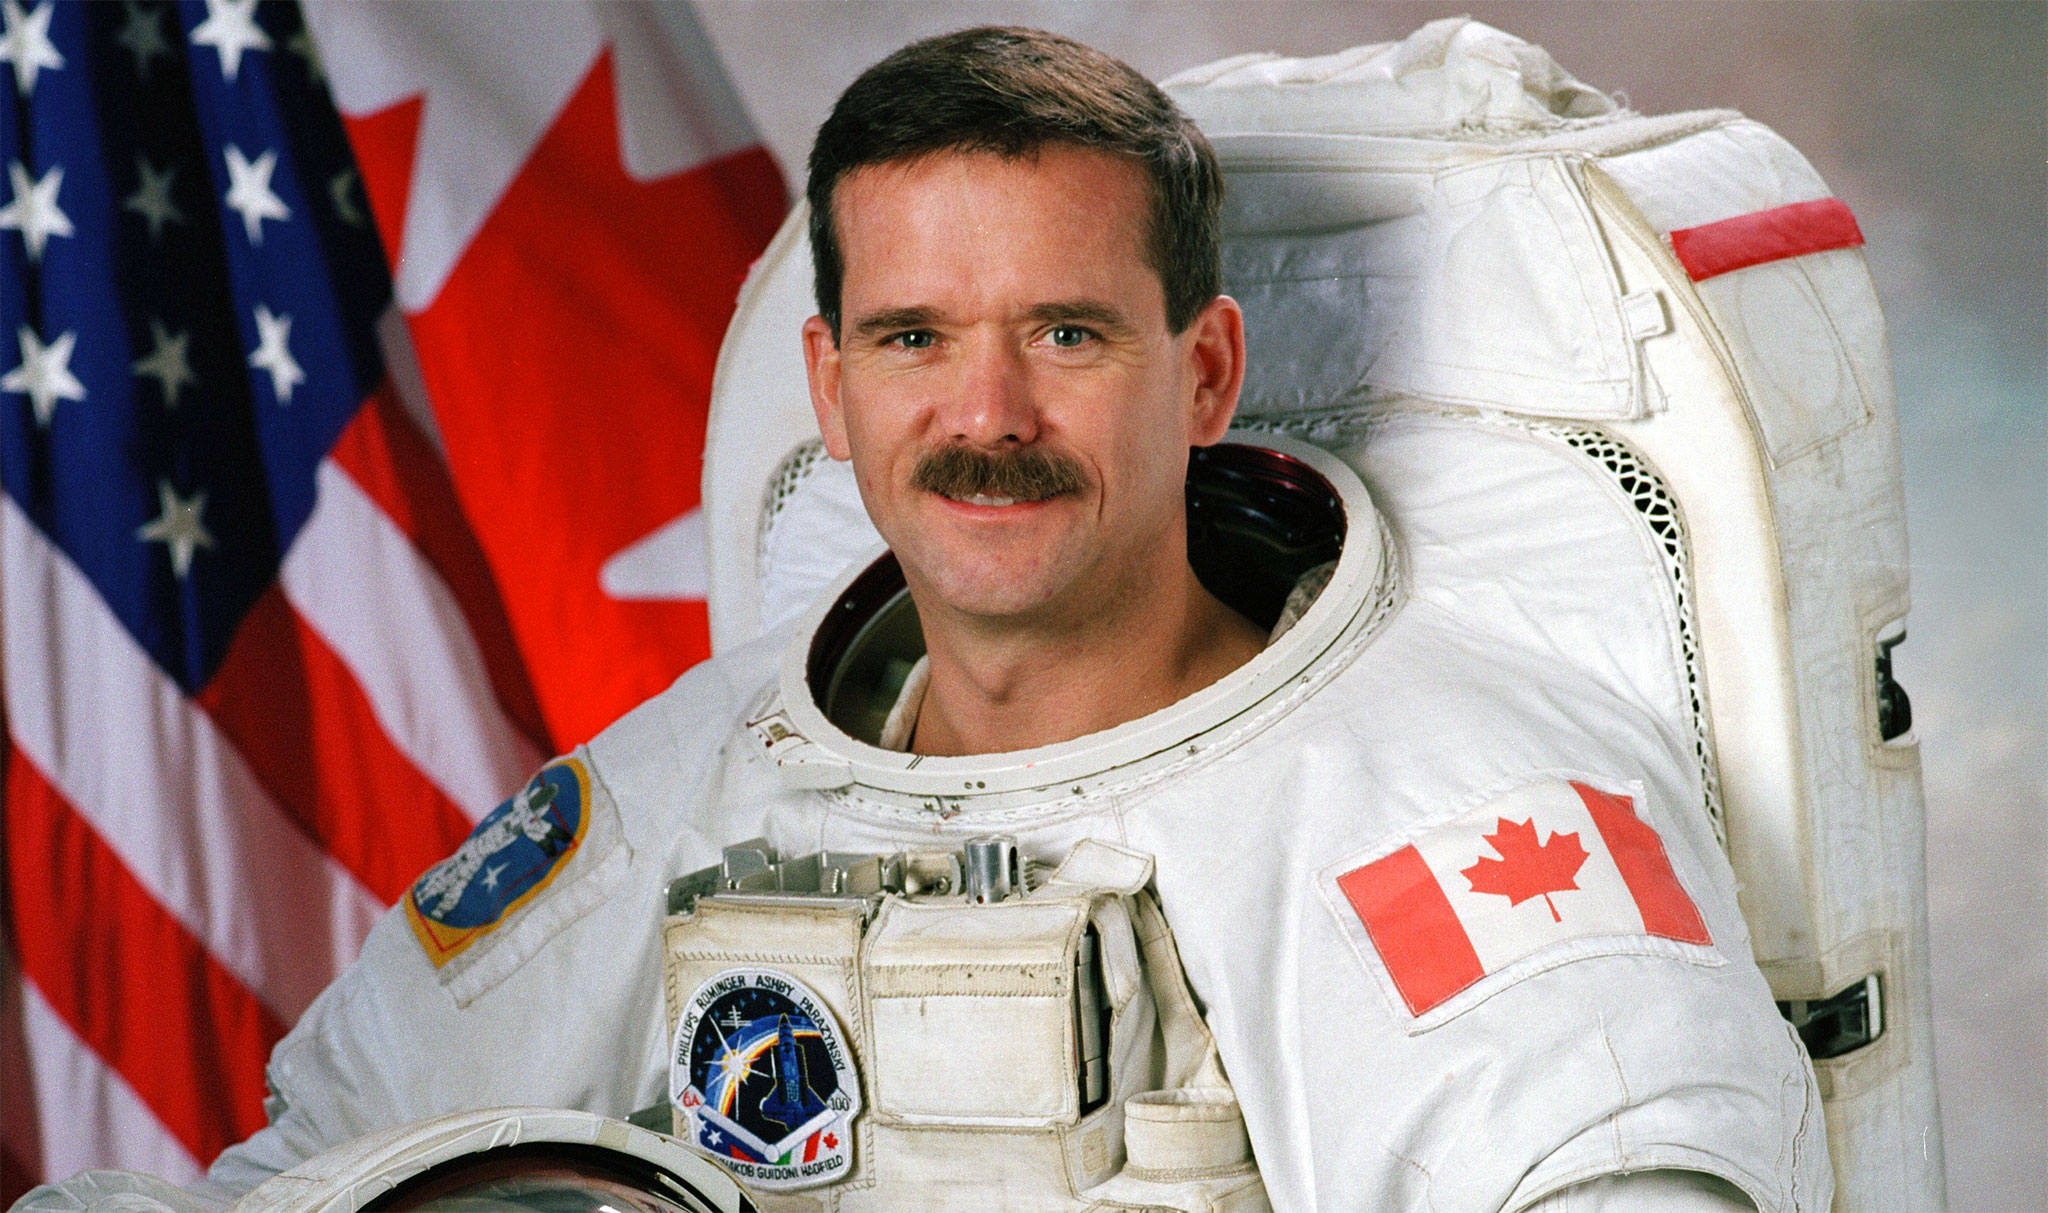 “It will not go according to the planning” says Astronaut Chris Hadfield